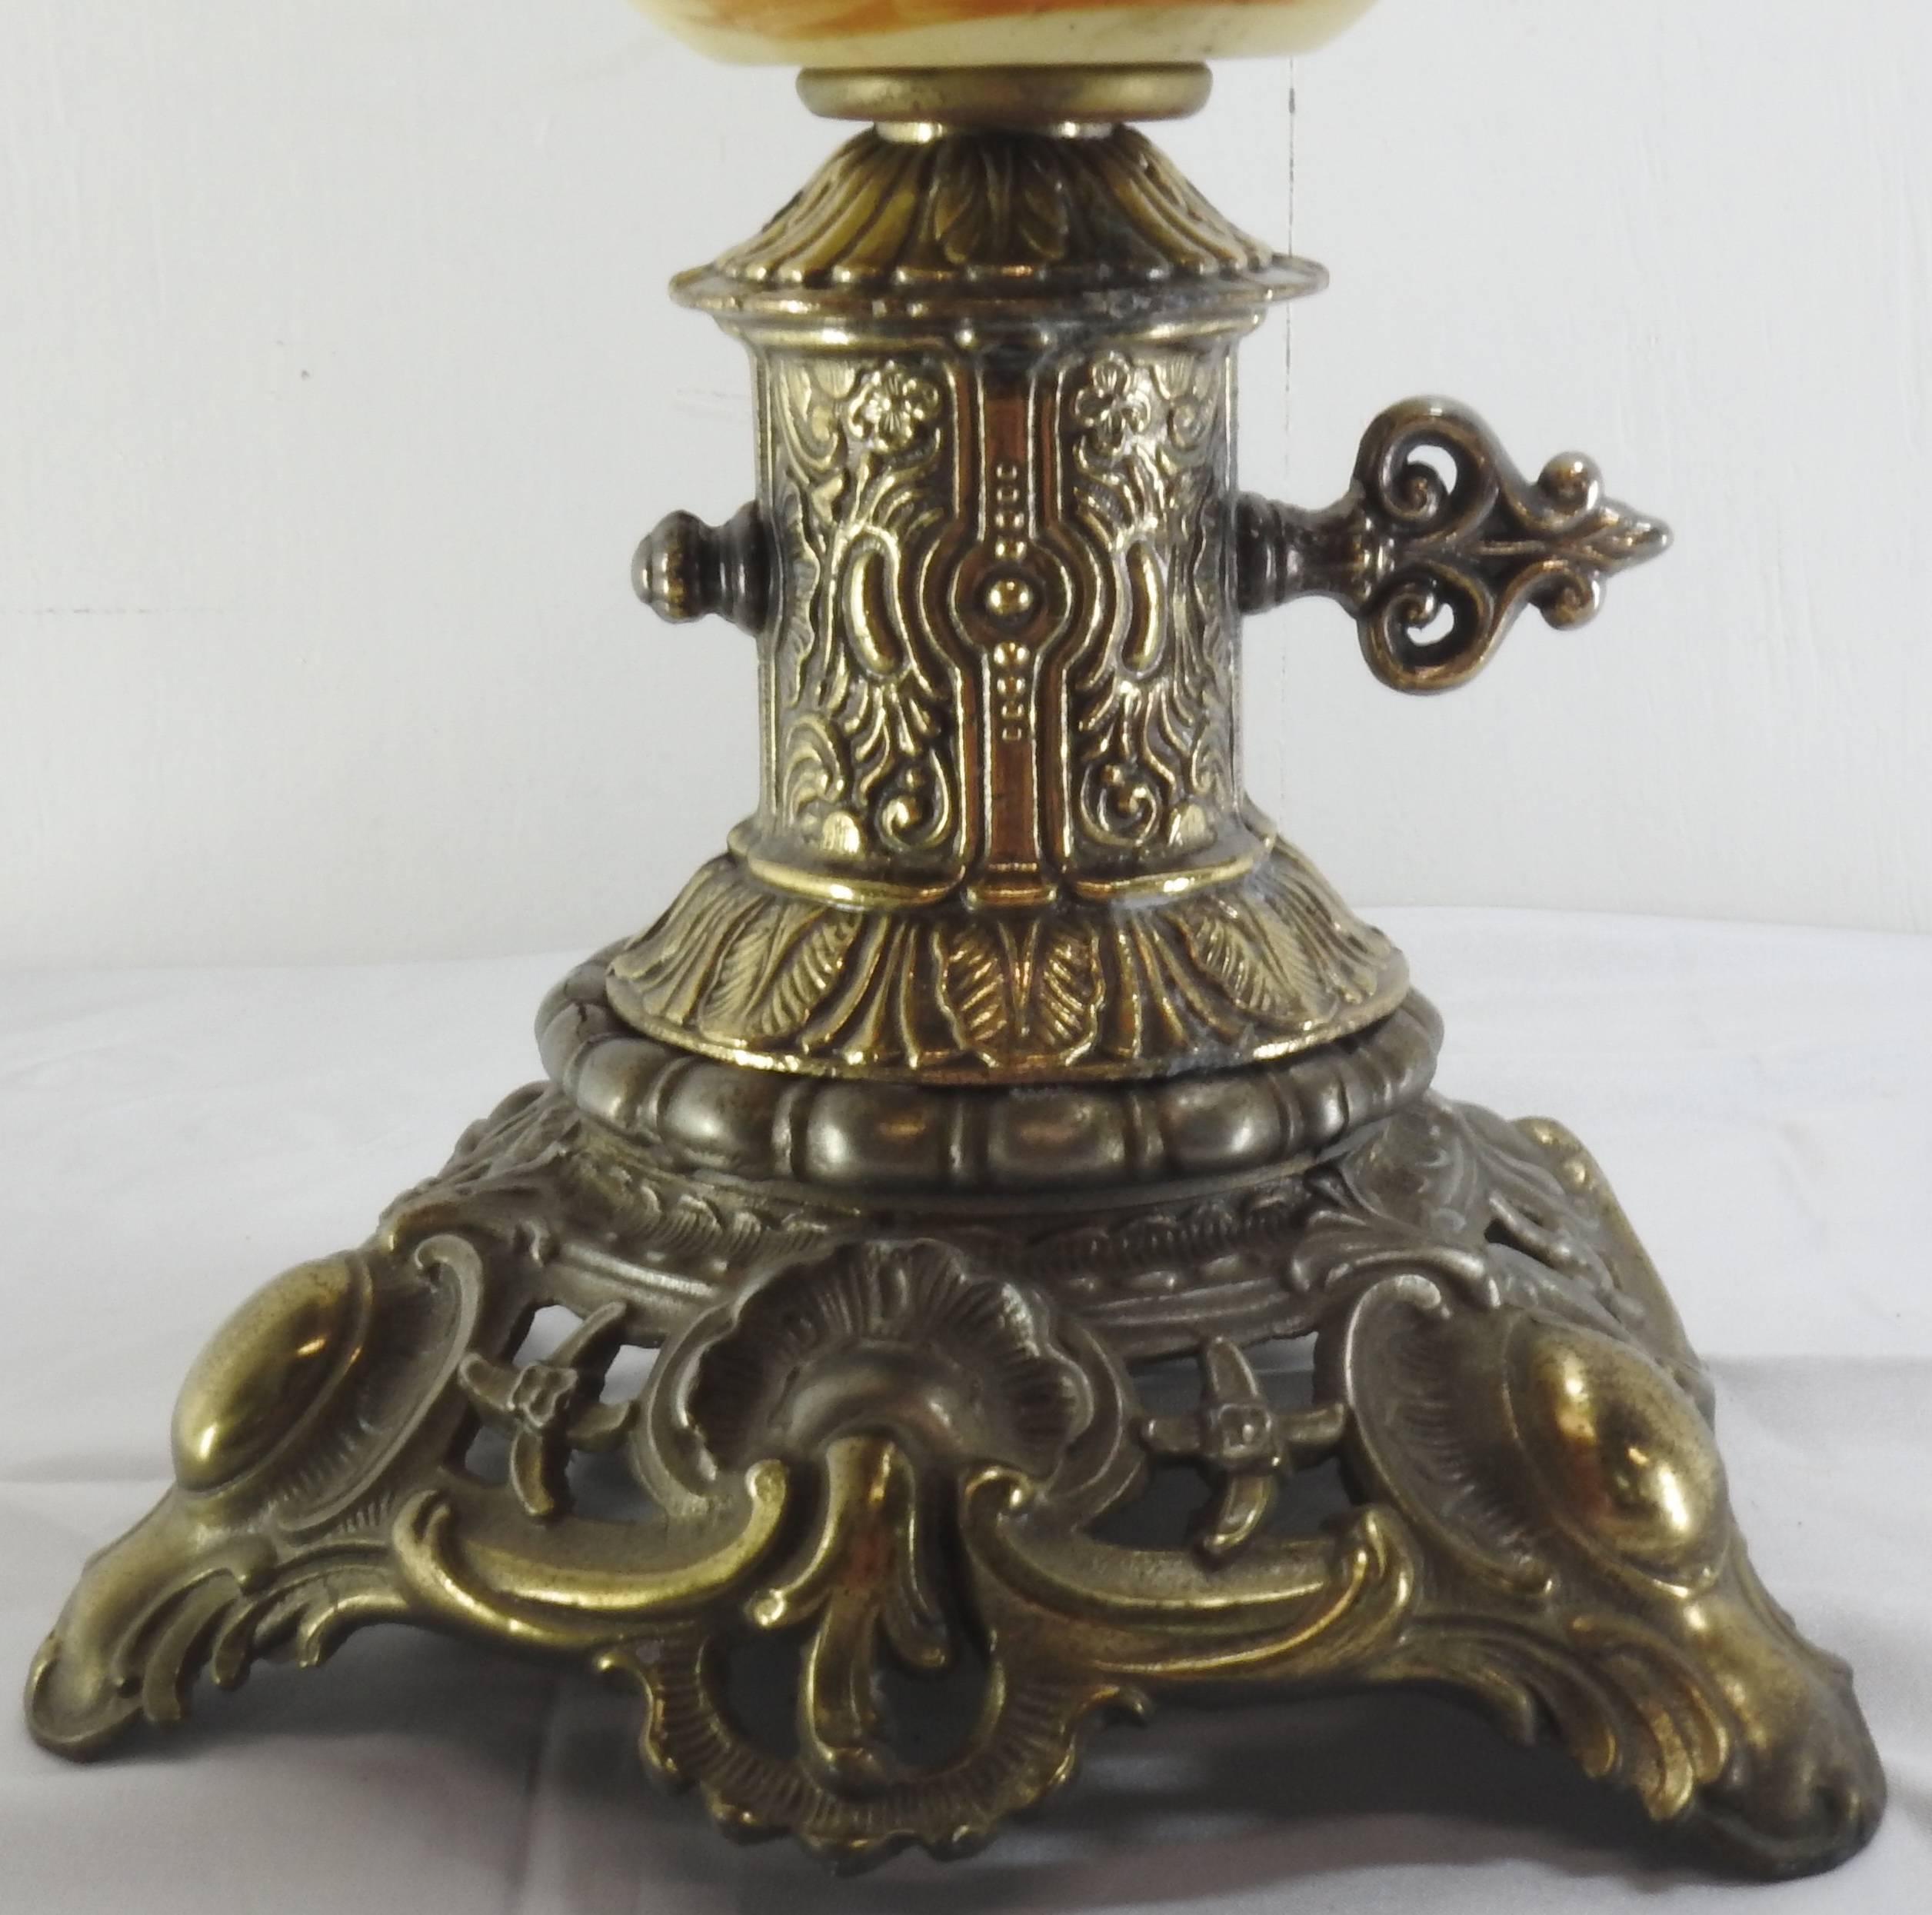 This listing features a fabulous hand painted jardinière depicting a fisherman on the water and magnificent mountains in the background. The antique brass finish cast metal surrounds the top and bottom and hosts a cherub on the top of the handle.